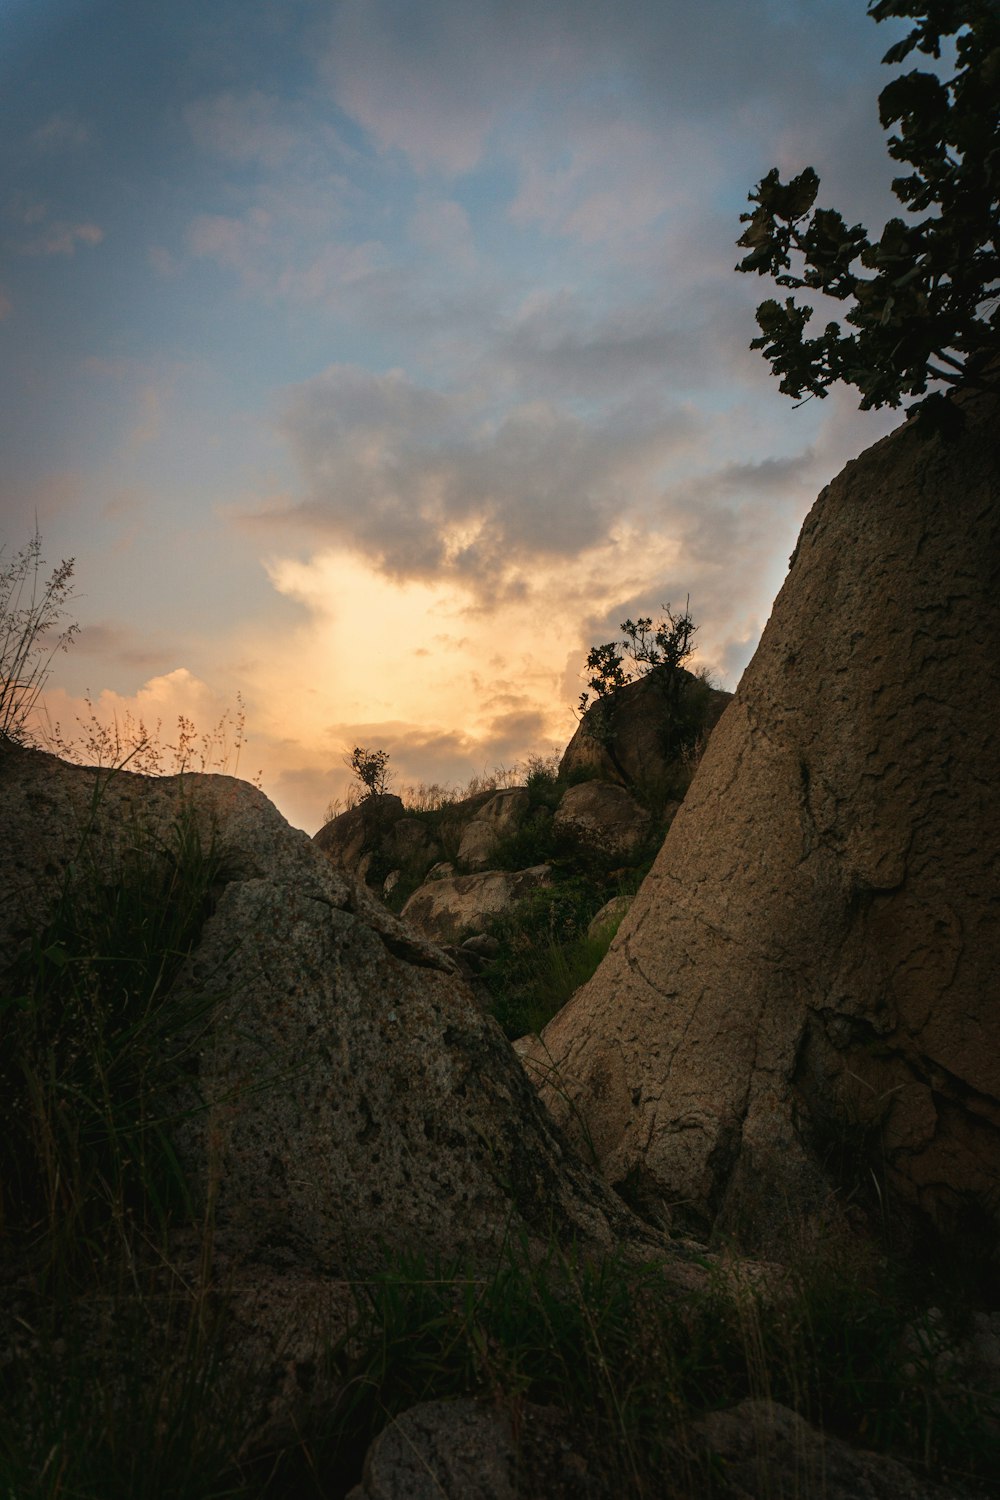 a rocky cliff with trees and a cloudy sky